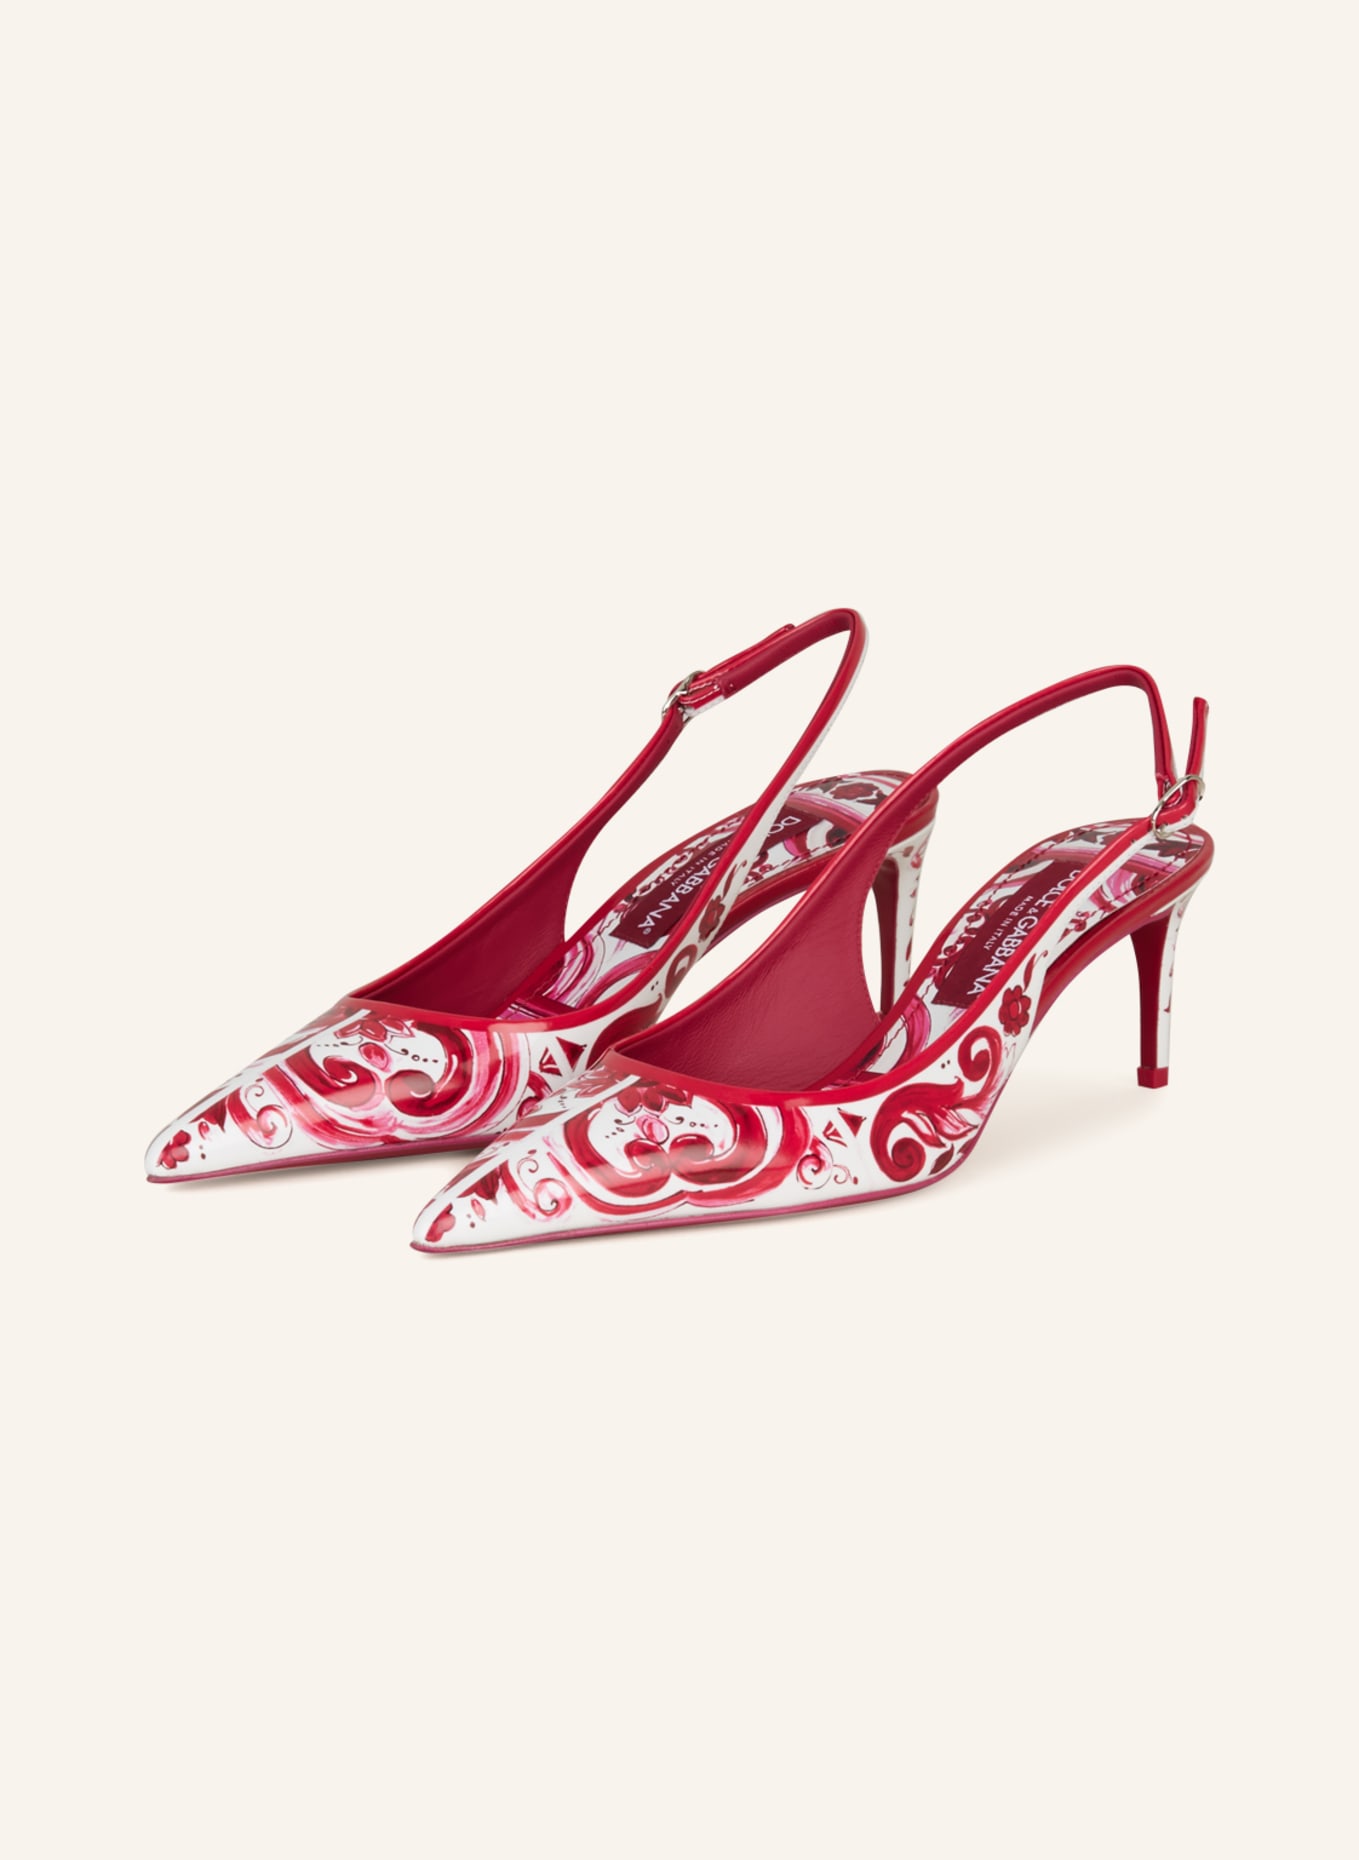 High-heels Shoes Dolce & Gabbana - 39, buy pre-owned at 150 EUR